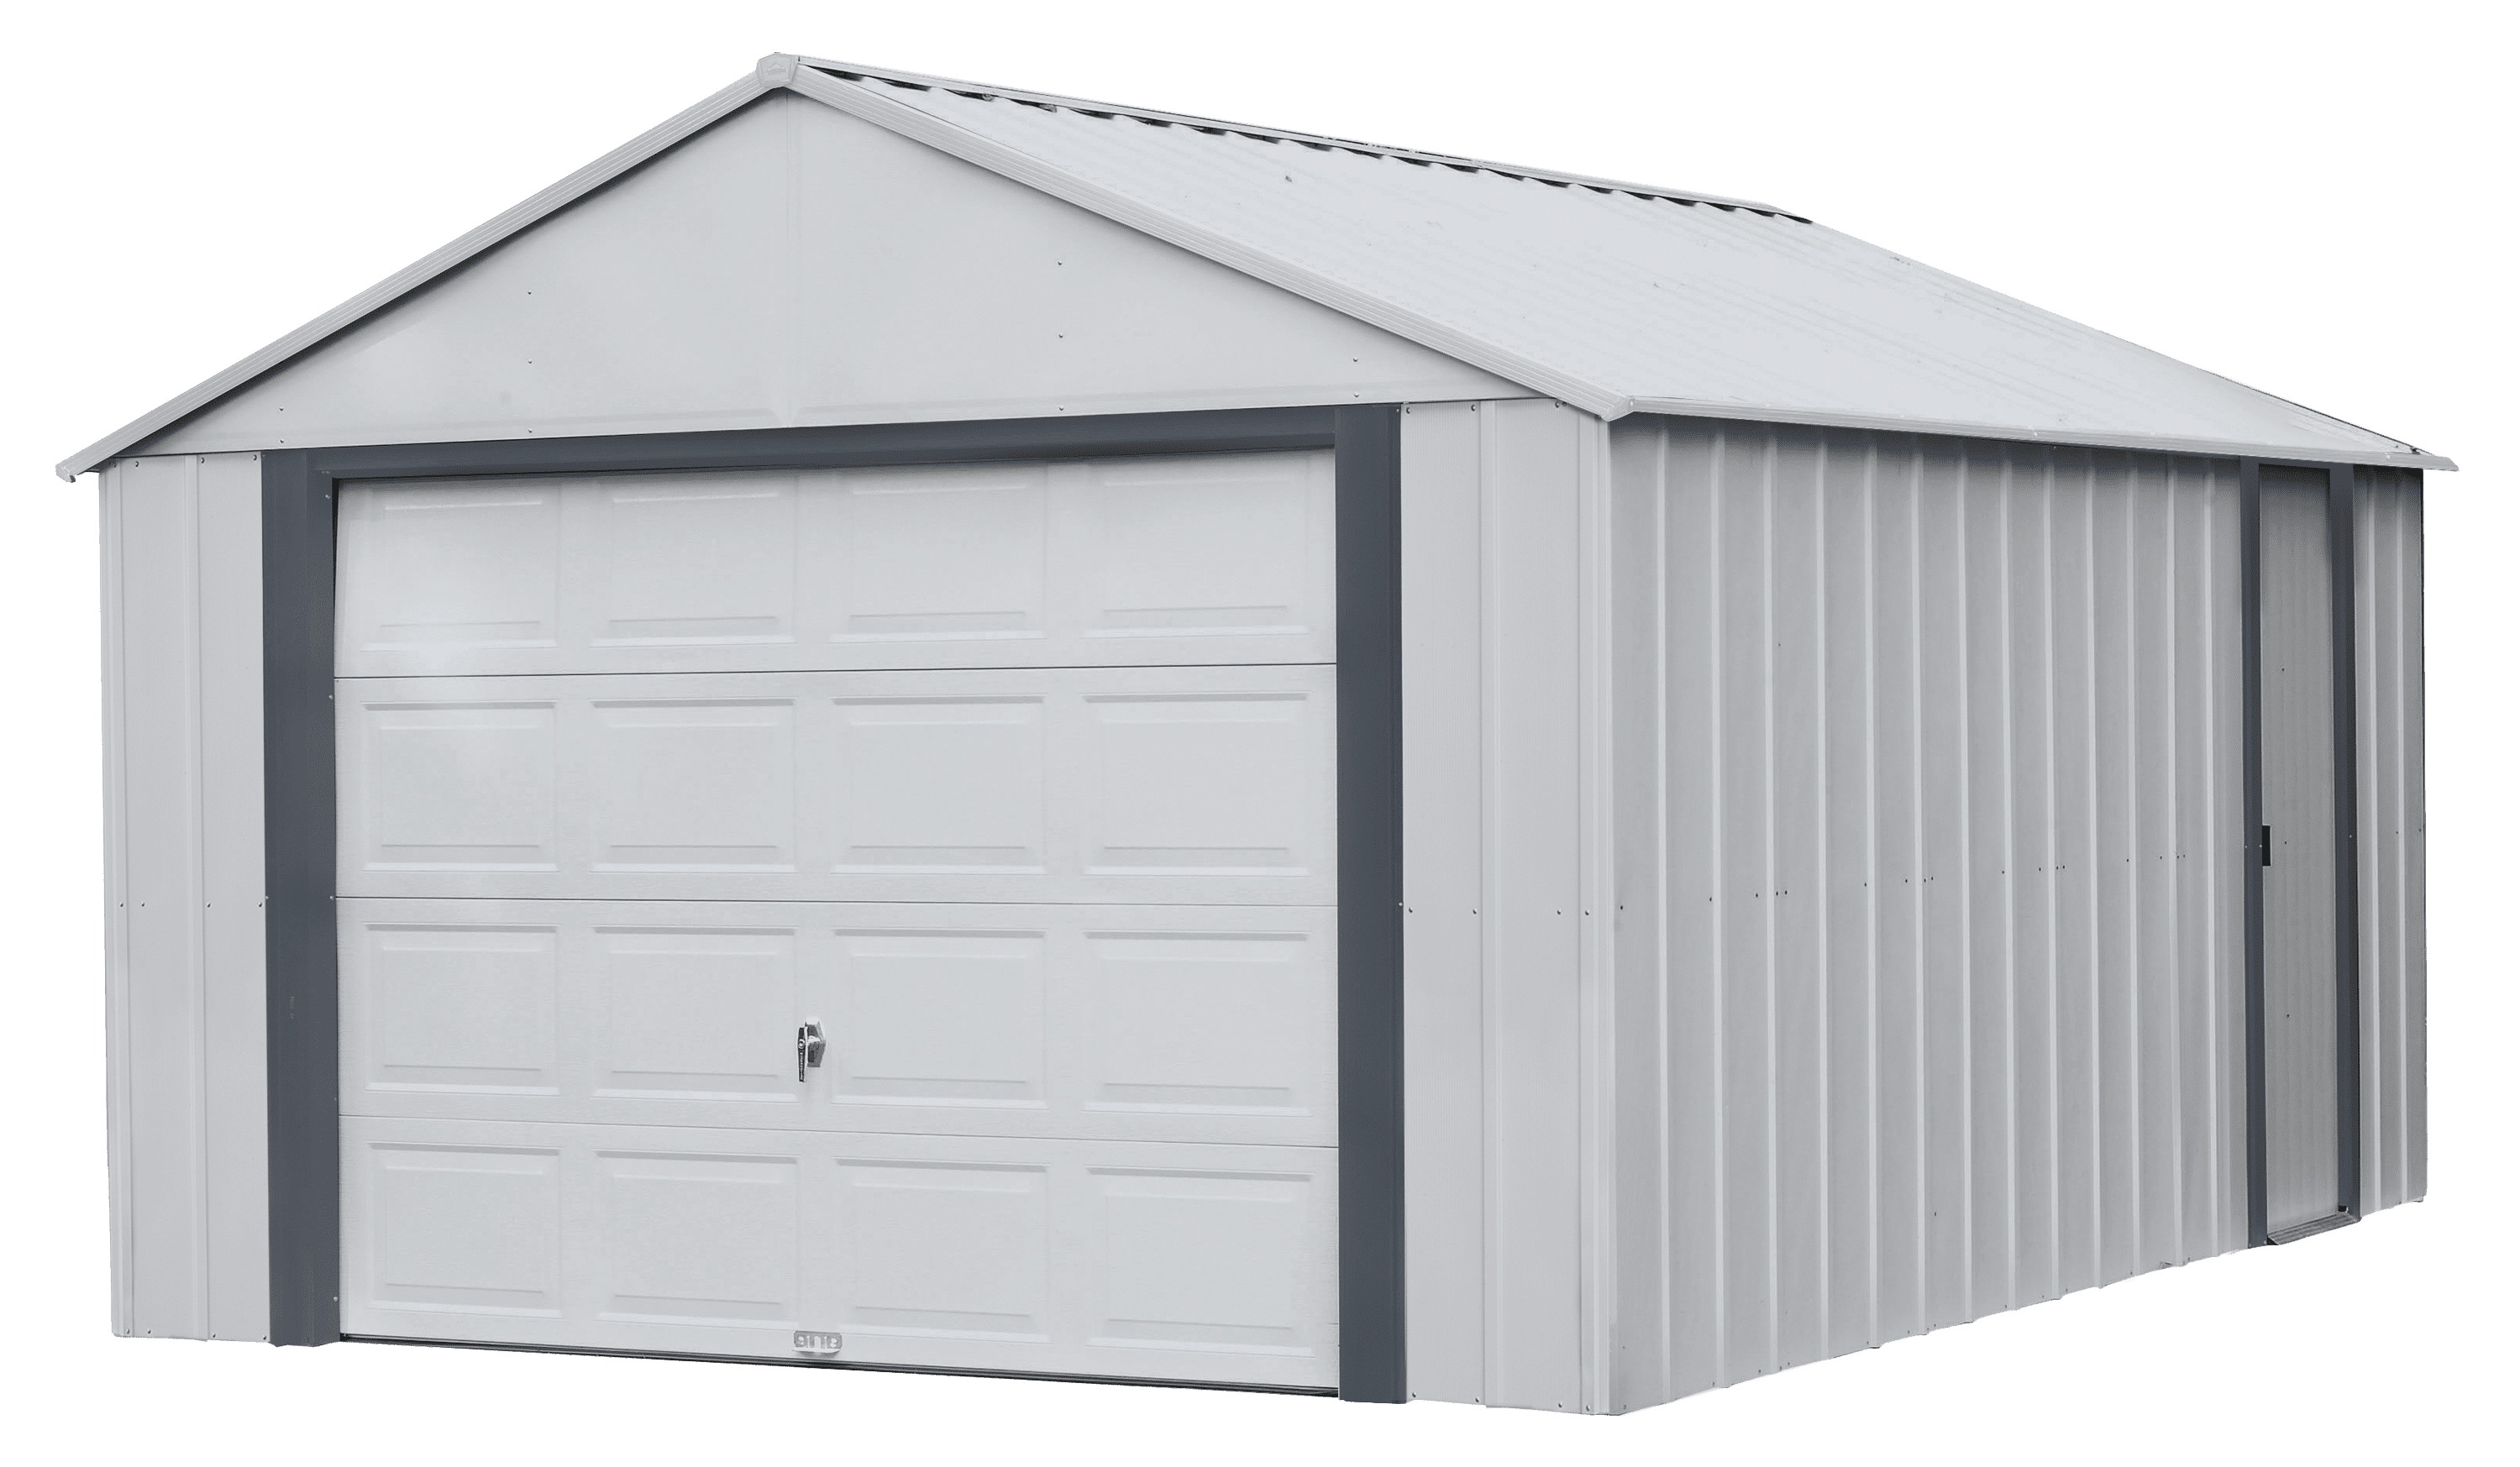 Metal shed at home depot